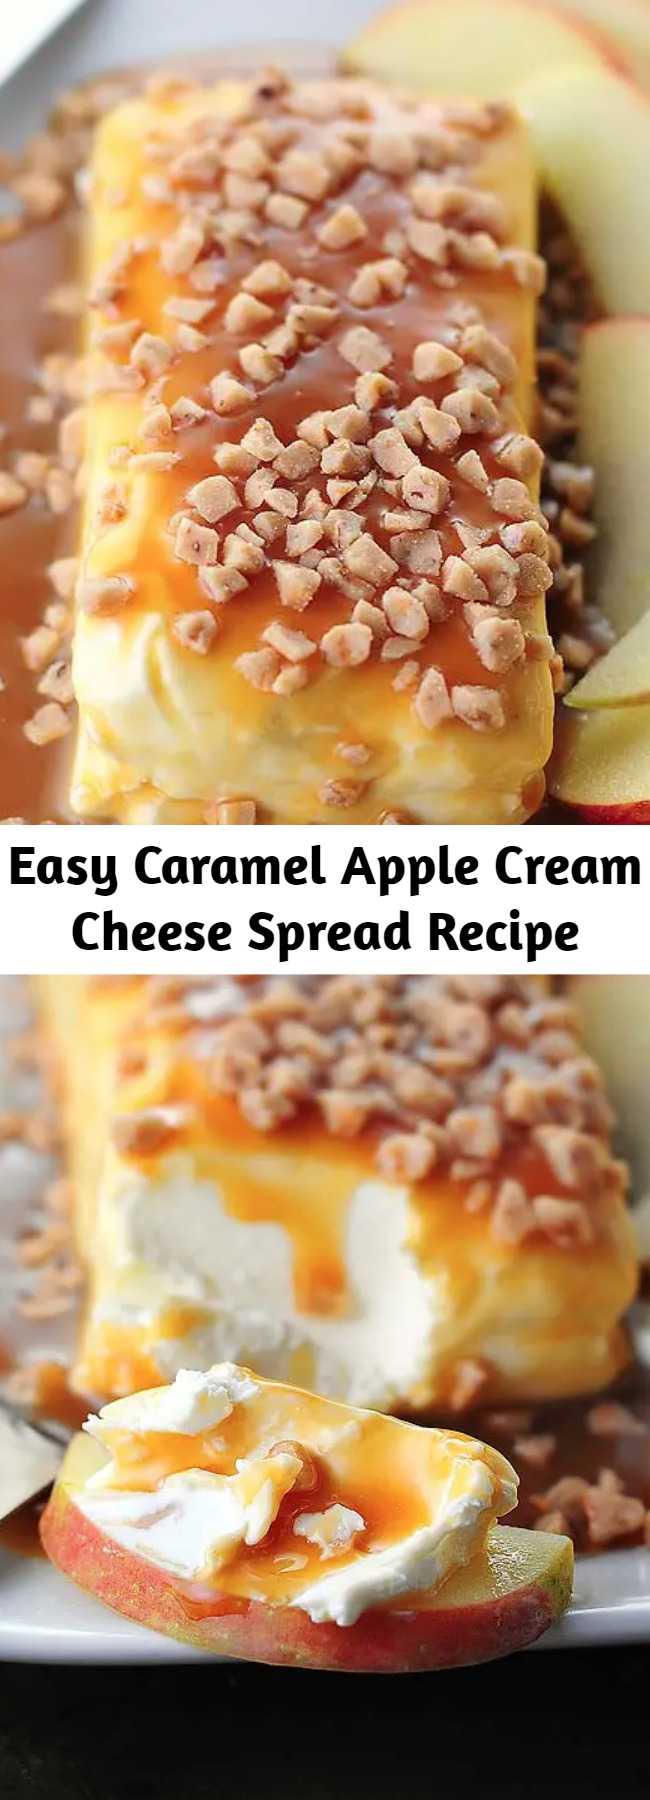 Easy Caramel Apple Cream Cheese Spread Recipe - This easy party spread is super satisfying and so easy to make and perfect for any fall entertaining.